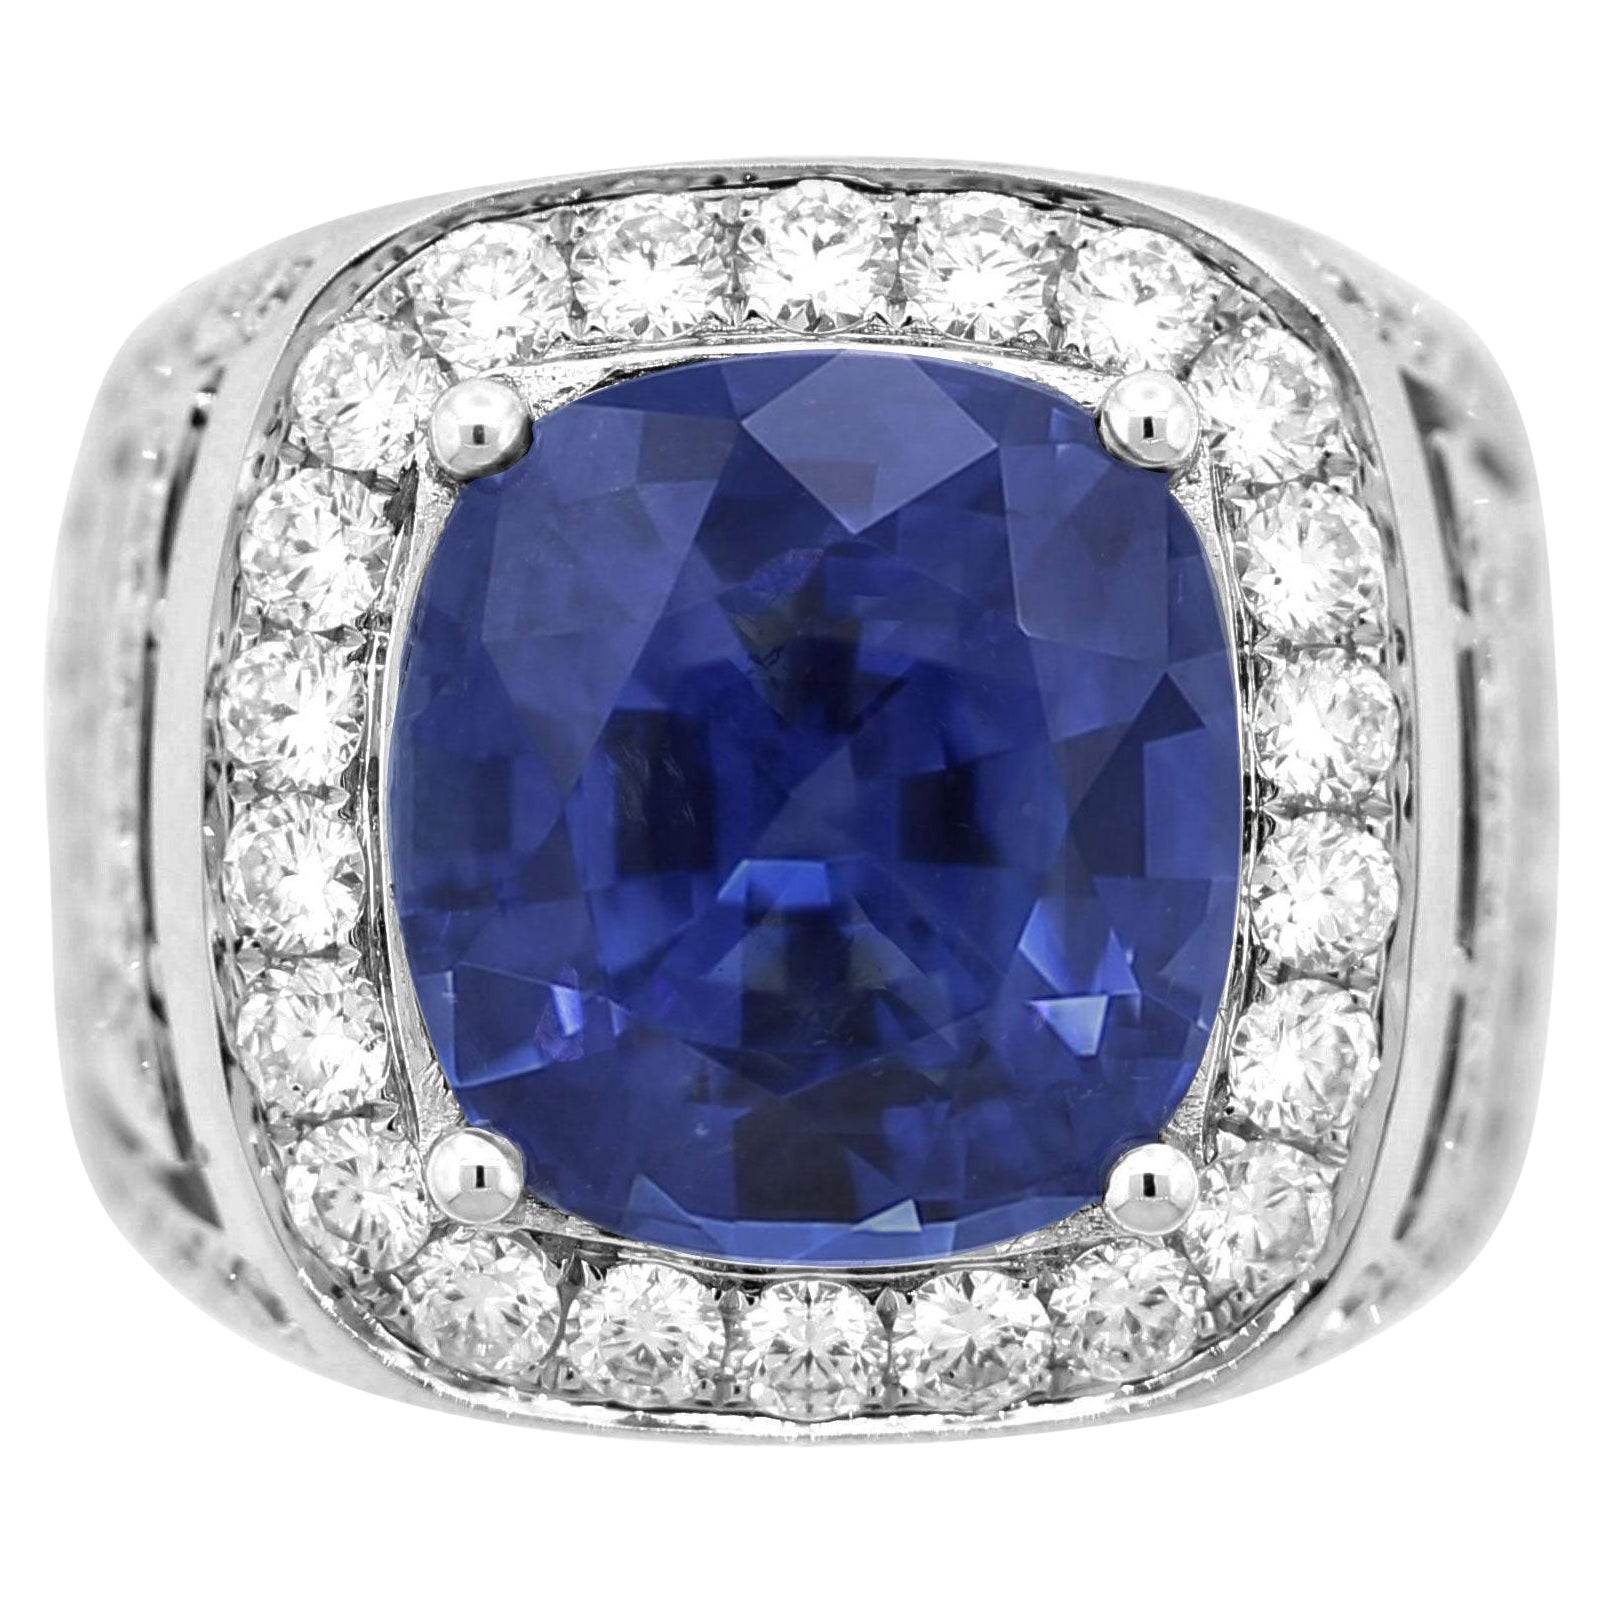 Fine Blue Sapphire Diamond Gold Ring, SSEF, GIA & Lotus Certified For Sale